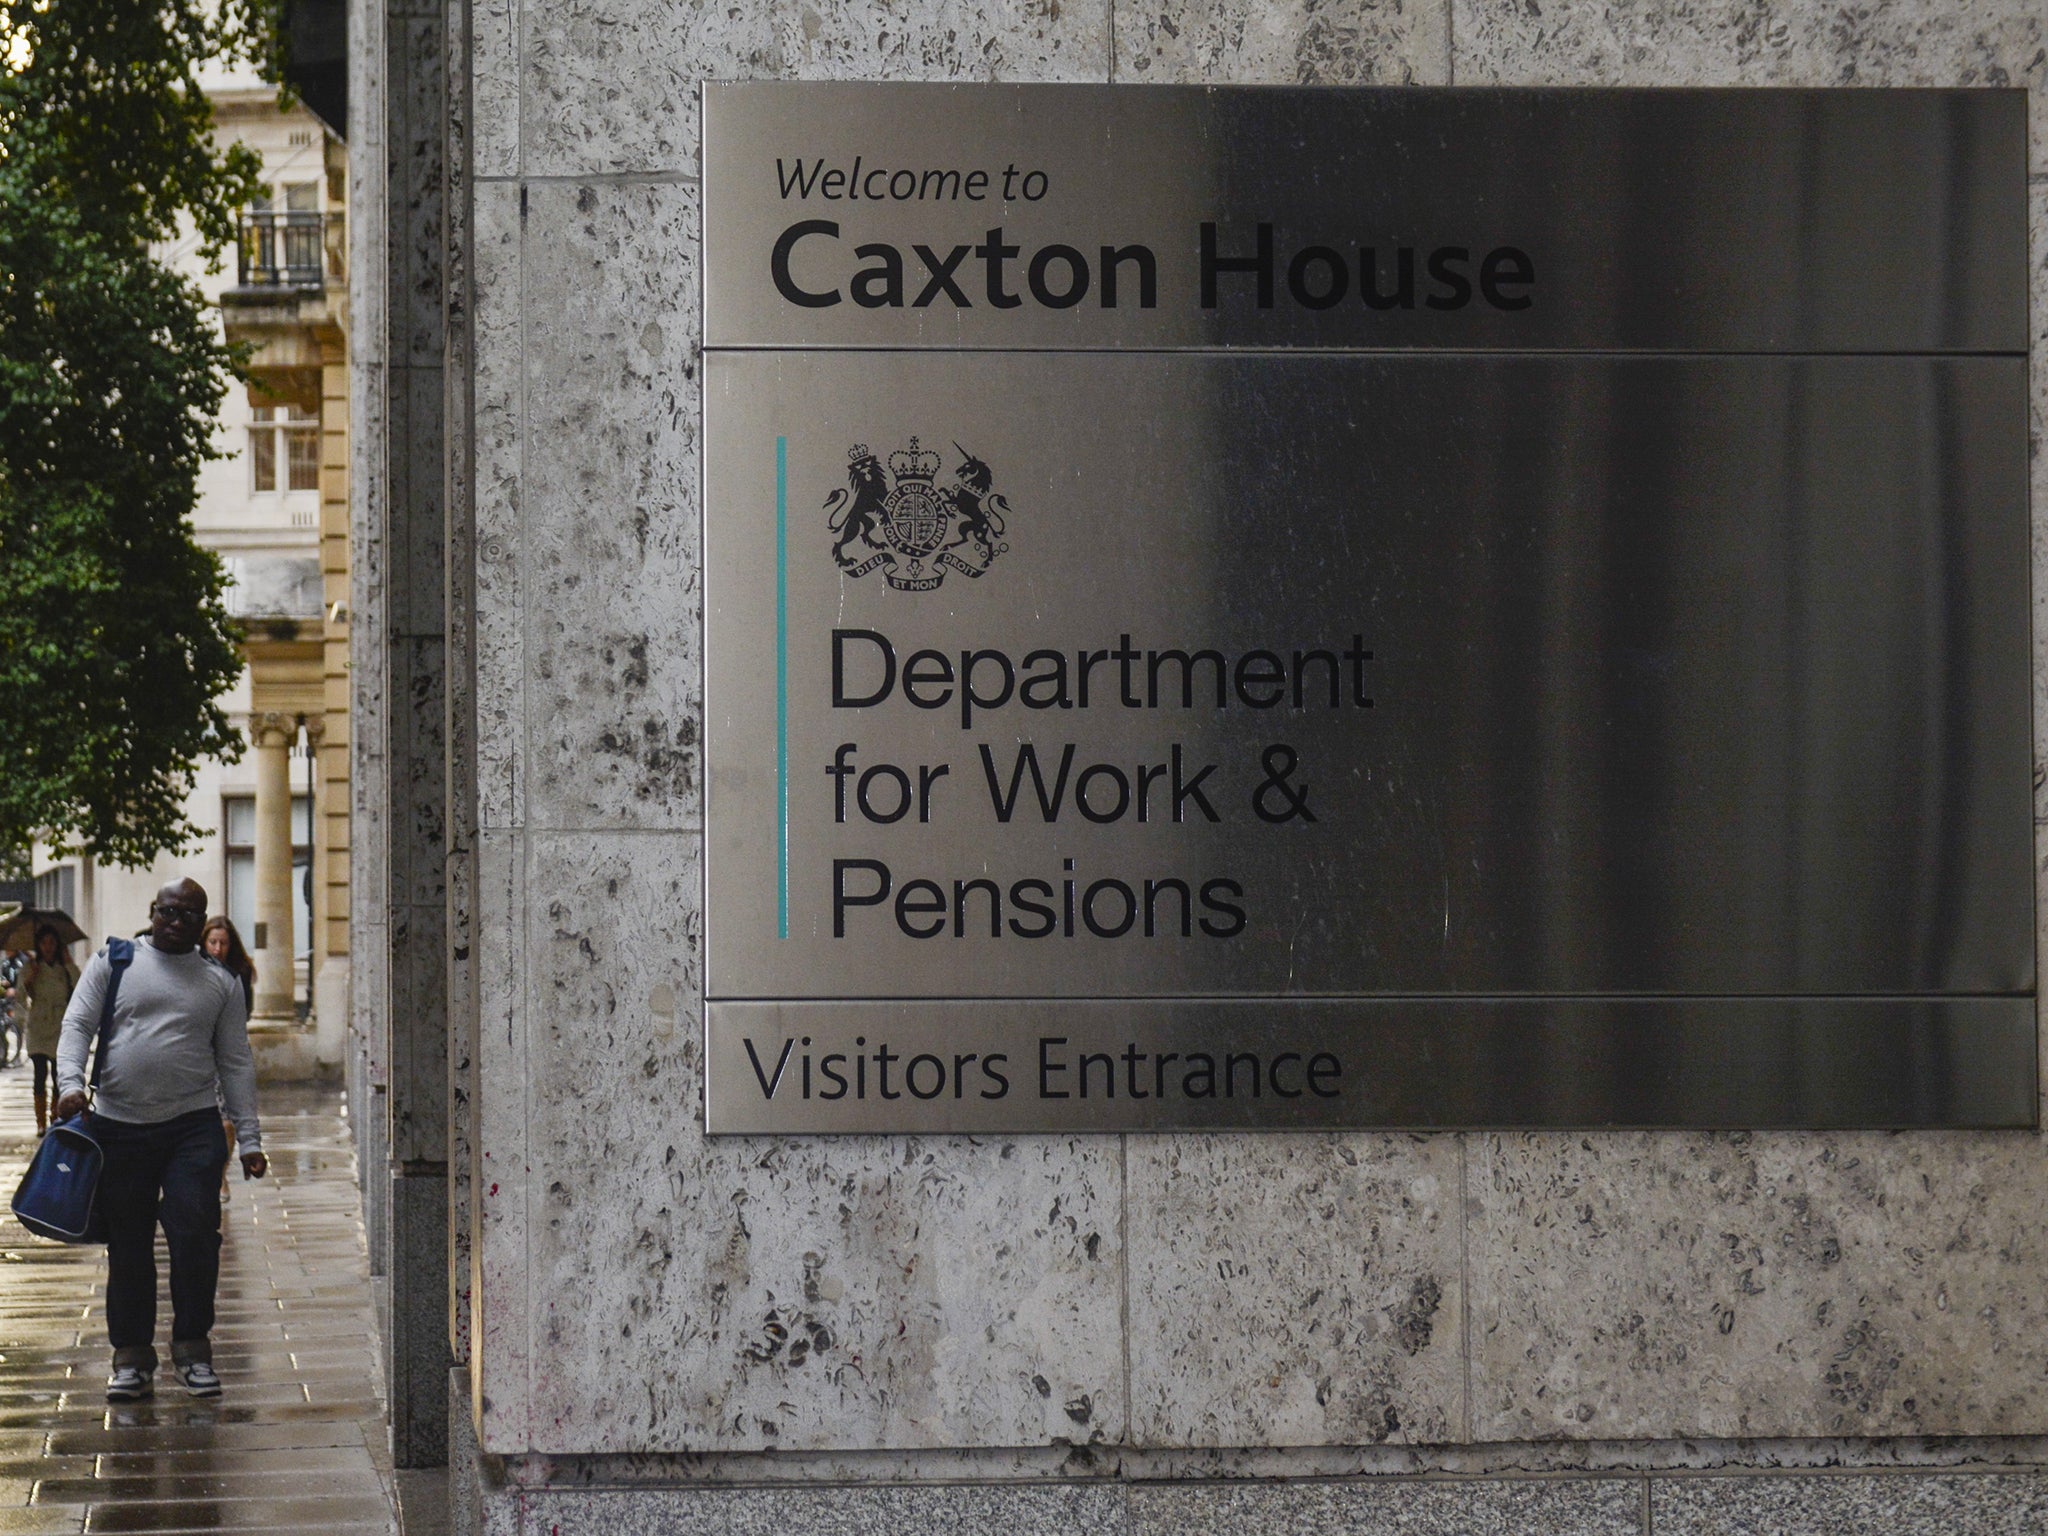 The findings have been disoputed by the Department for Work and Pensions